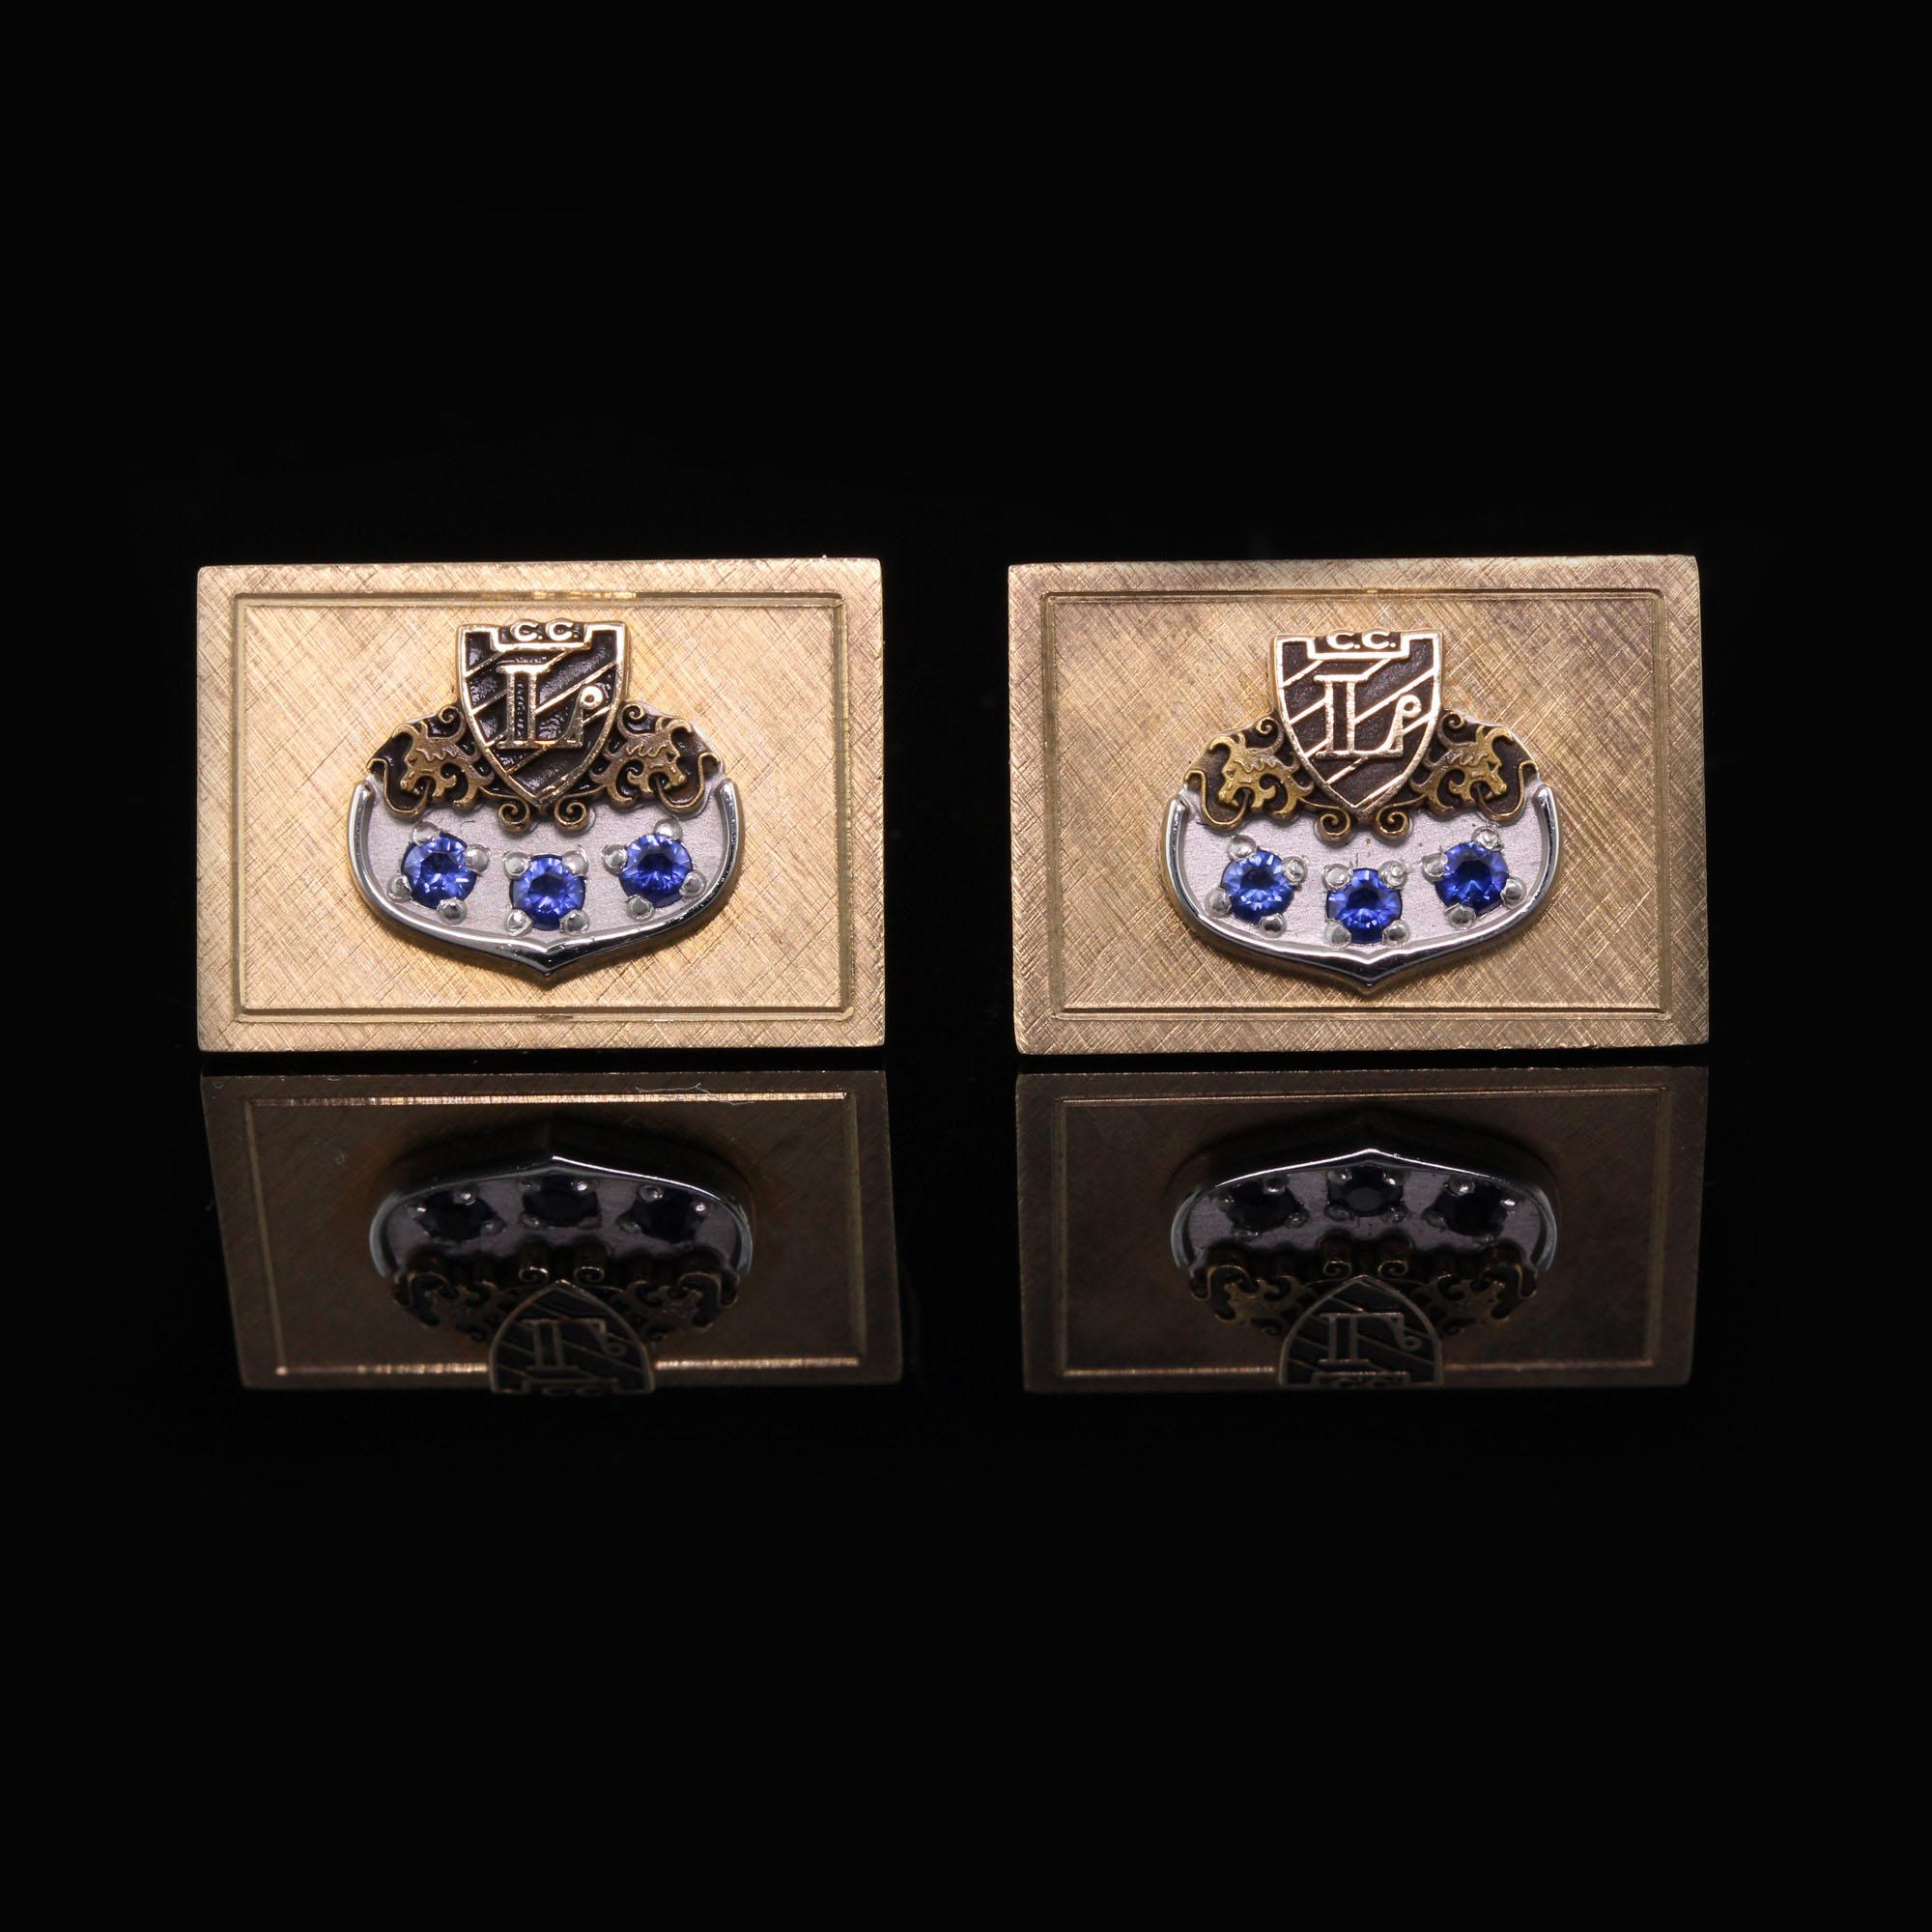 Very cool 14K yellow gold estate cufflinks with 'L' initial emblem, black enamel, and blue sapphires.

Metal: 14K Yellow Gold

Weight: 18 grams

Measurement: The cufflinks measures 22 mm wide and 16 mm high.